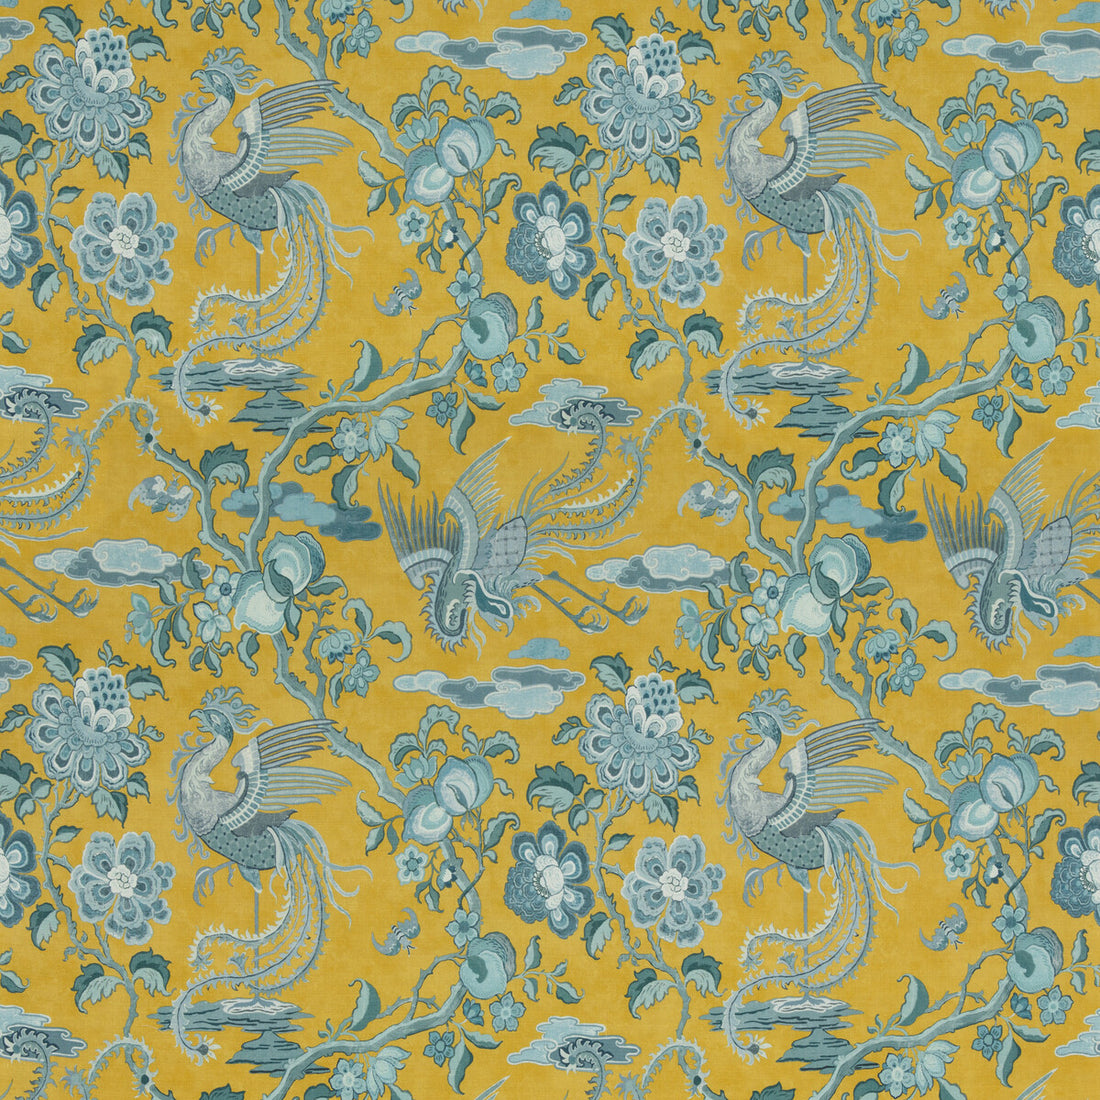 Chifu fabric in ochre/blue color - pattern BP10852.2.0 - by G P &amp; J Baker in the Chifu collection